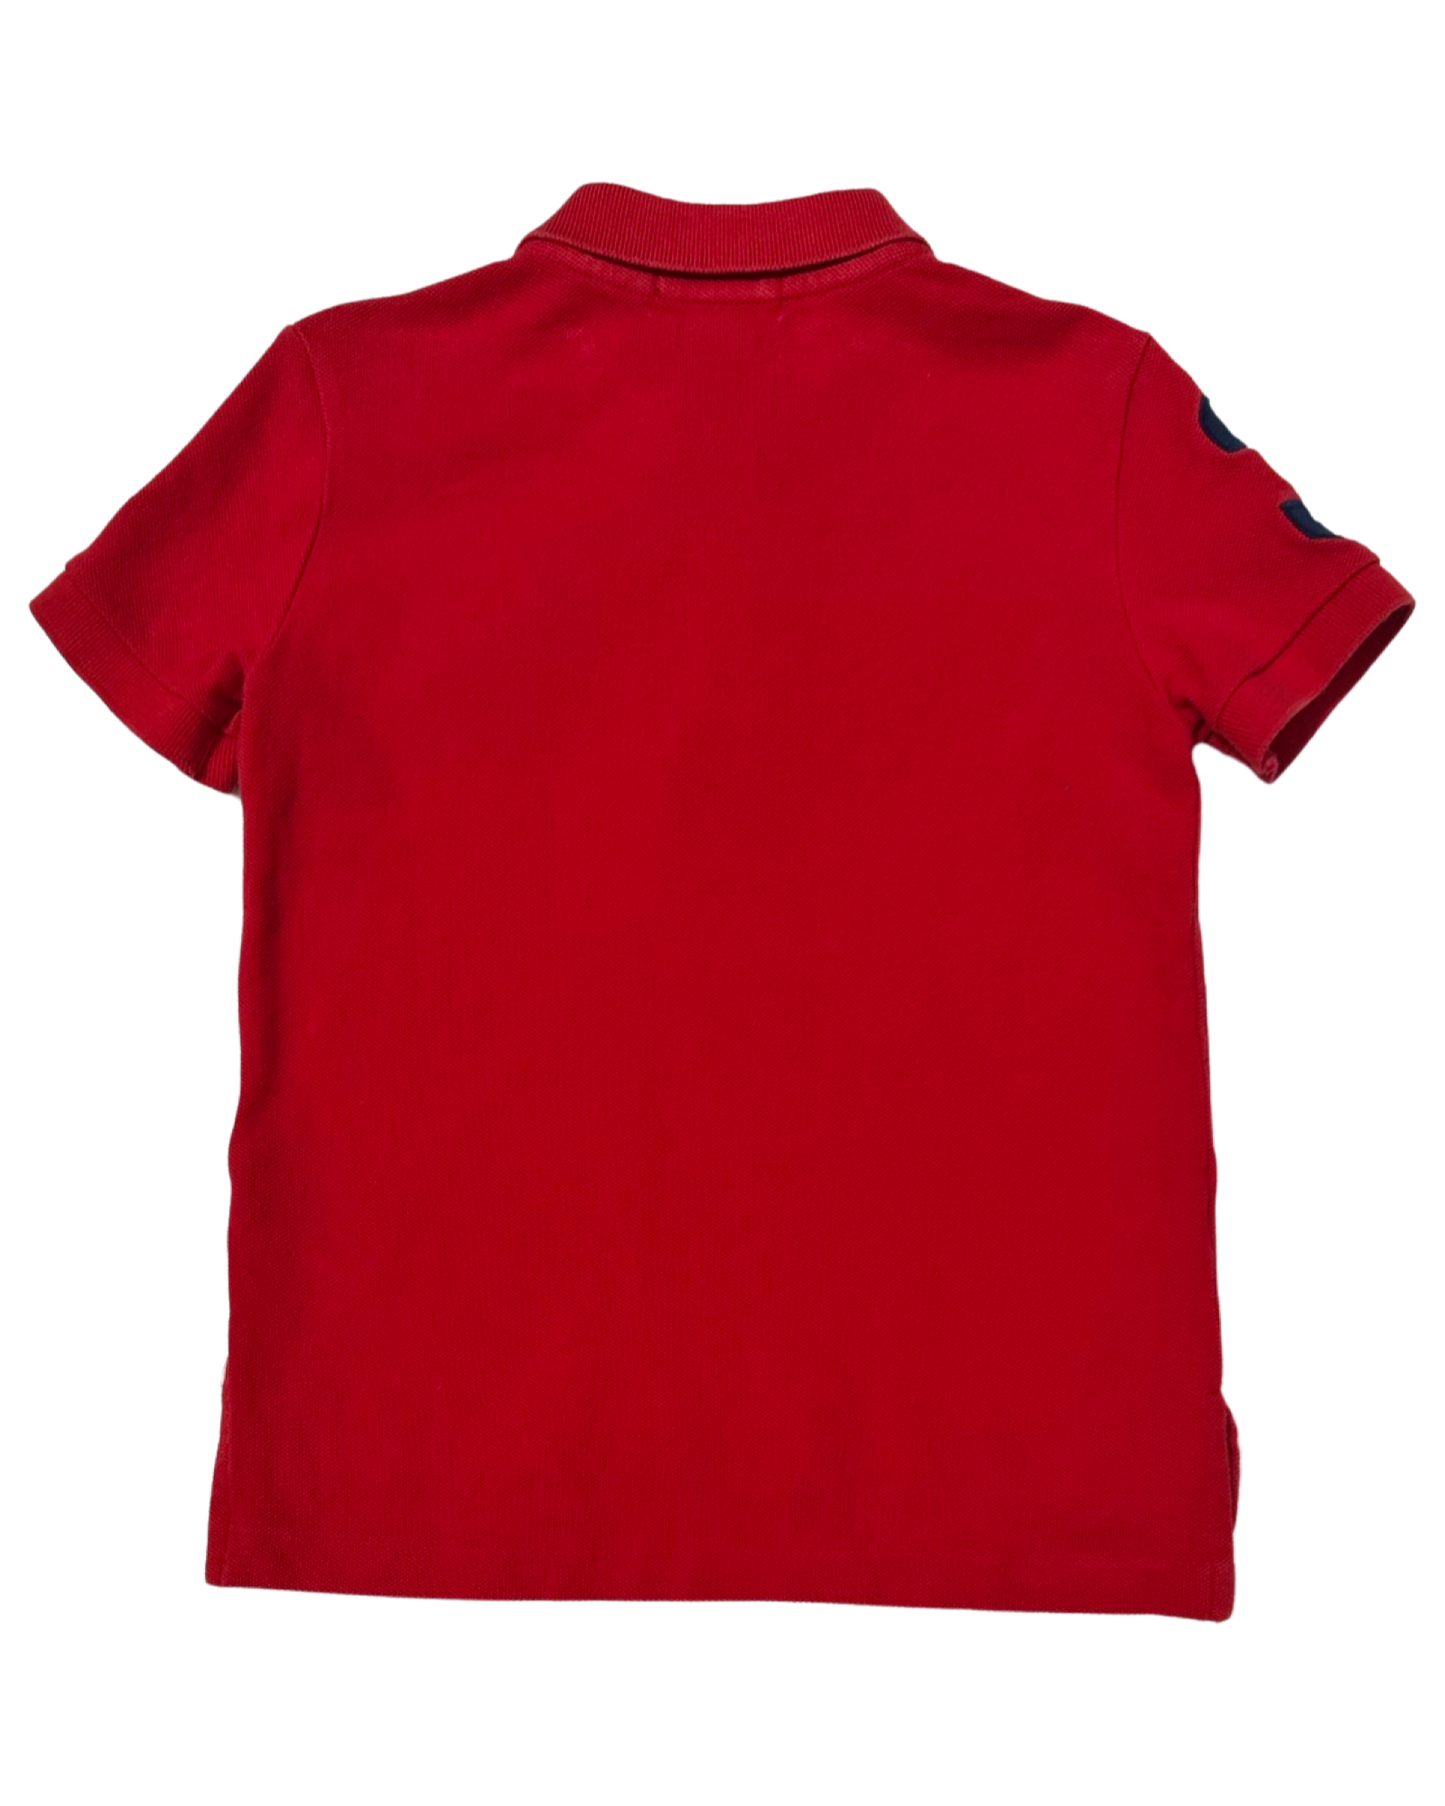 Ralph Lauren Double Pony red polo shirt (2-3yrs)